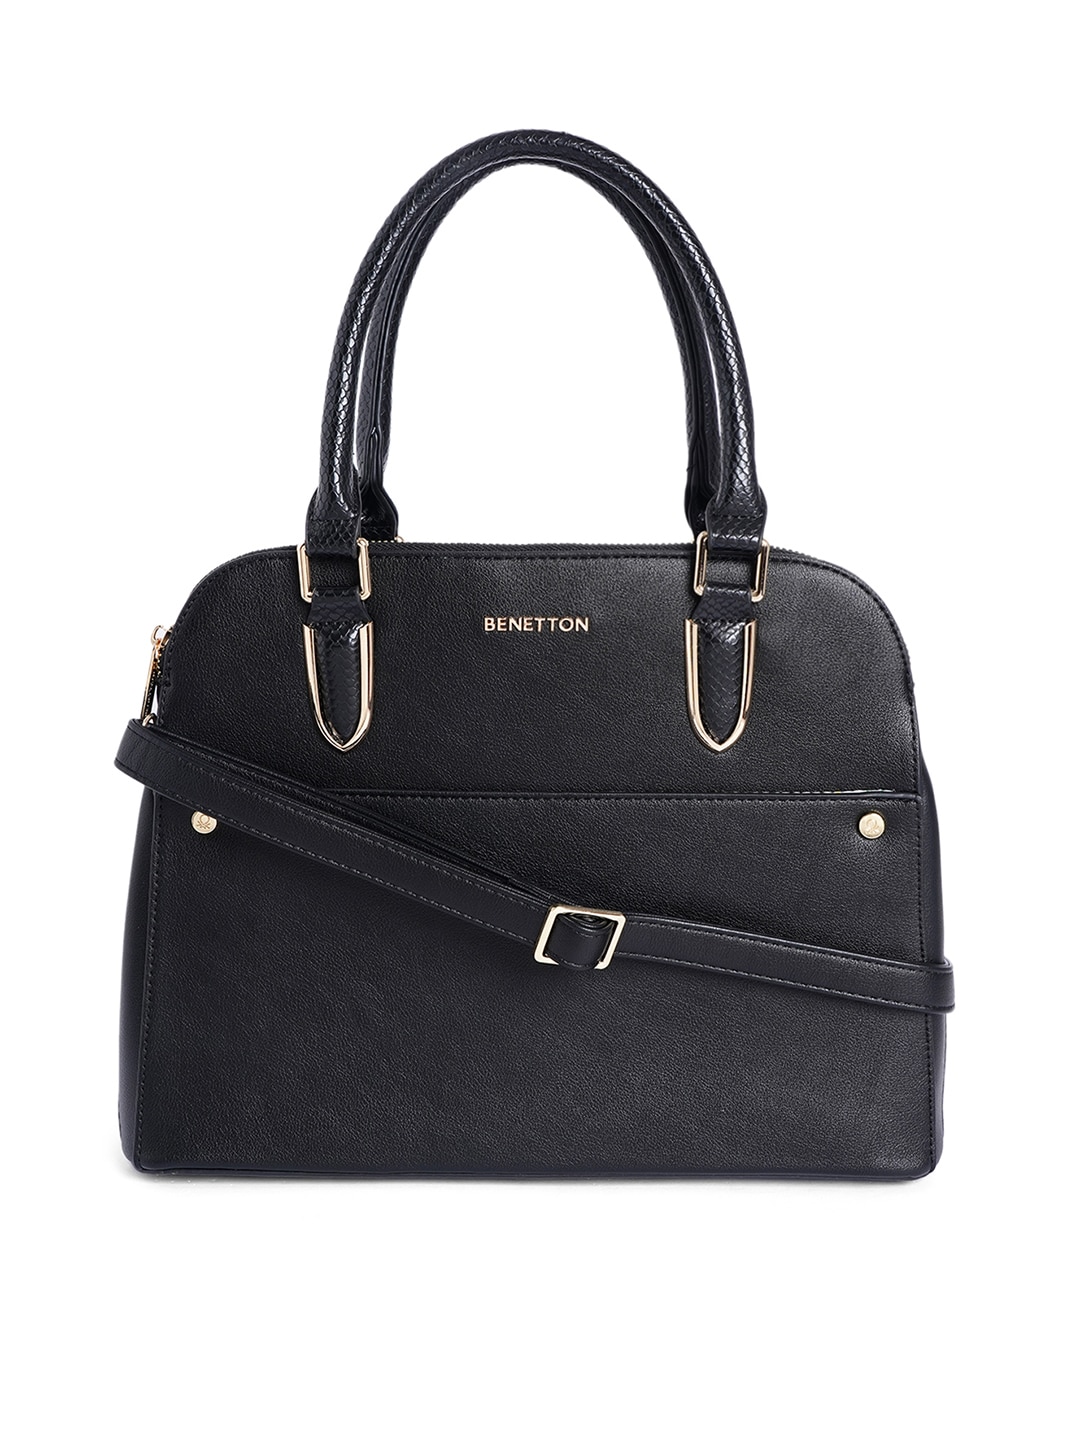 United Colors of Benetton Black Structured Satchel Price in India